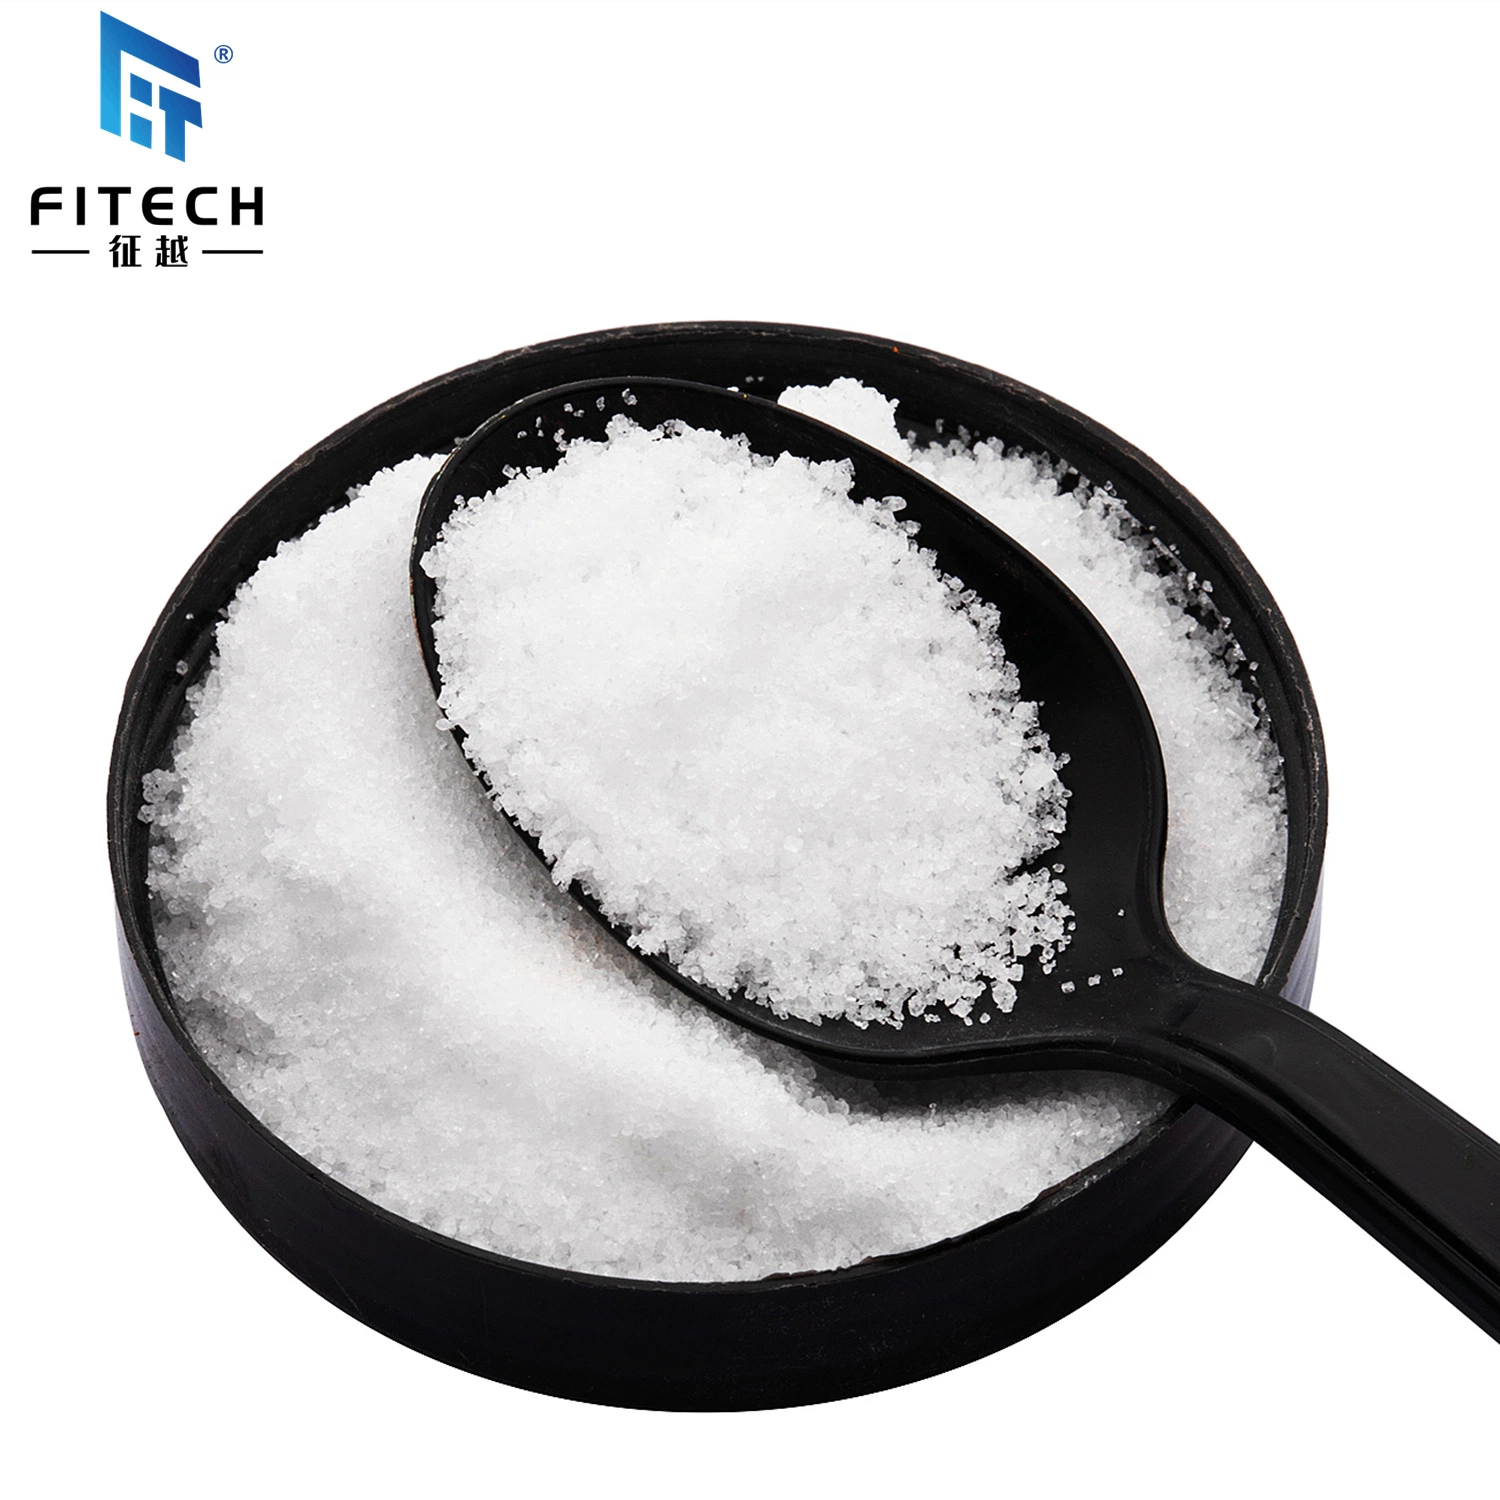 High Quality Zirconium Sulphate Tetrahydrate Zos/Zst for Pigment Coating